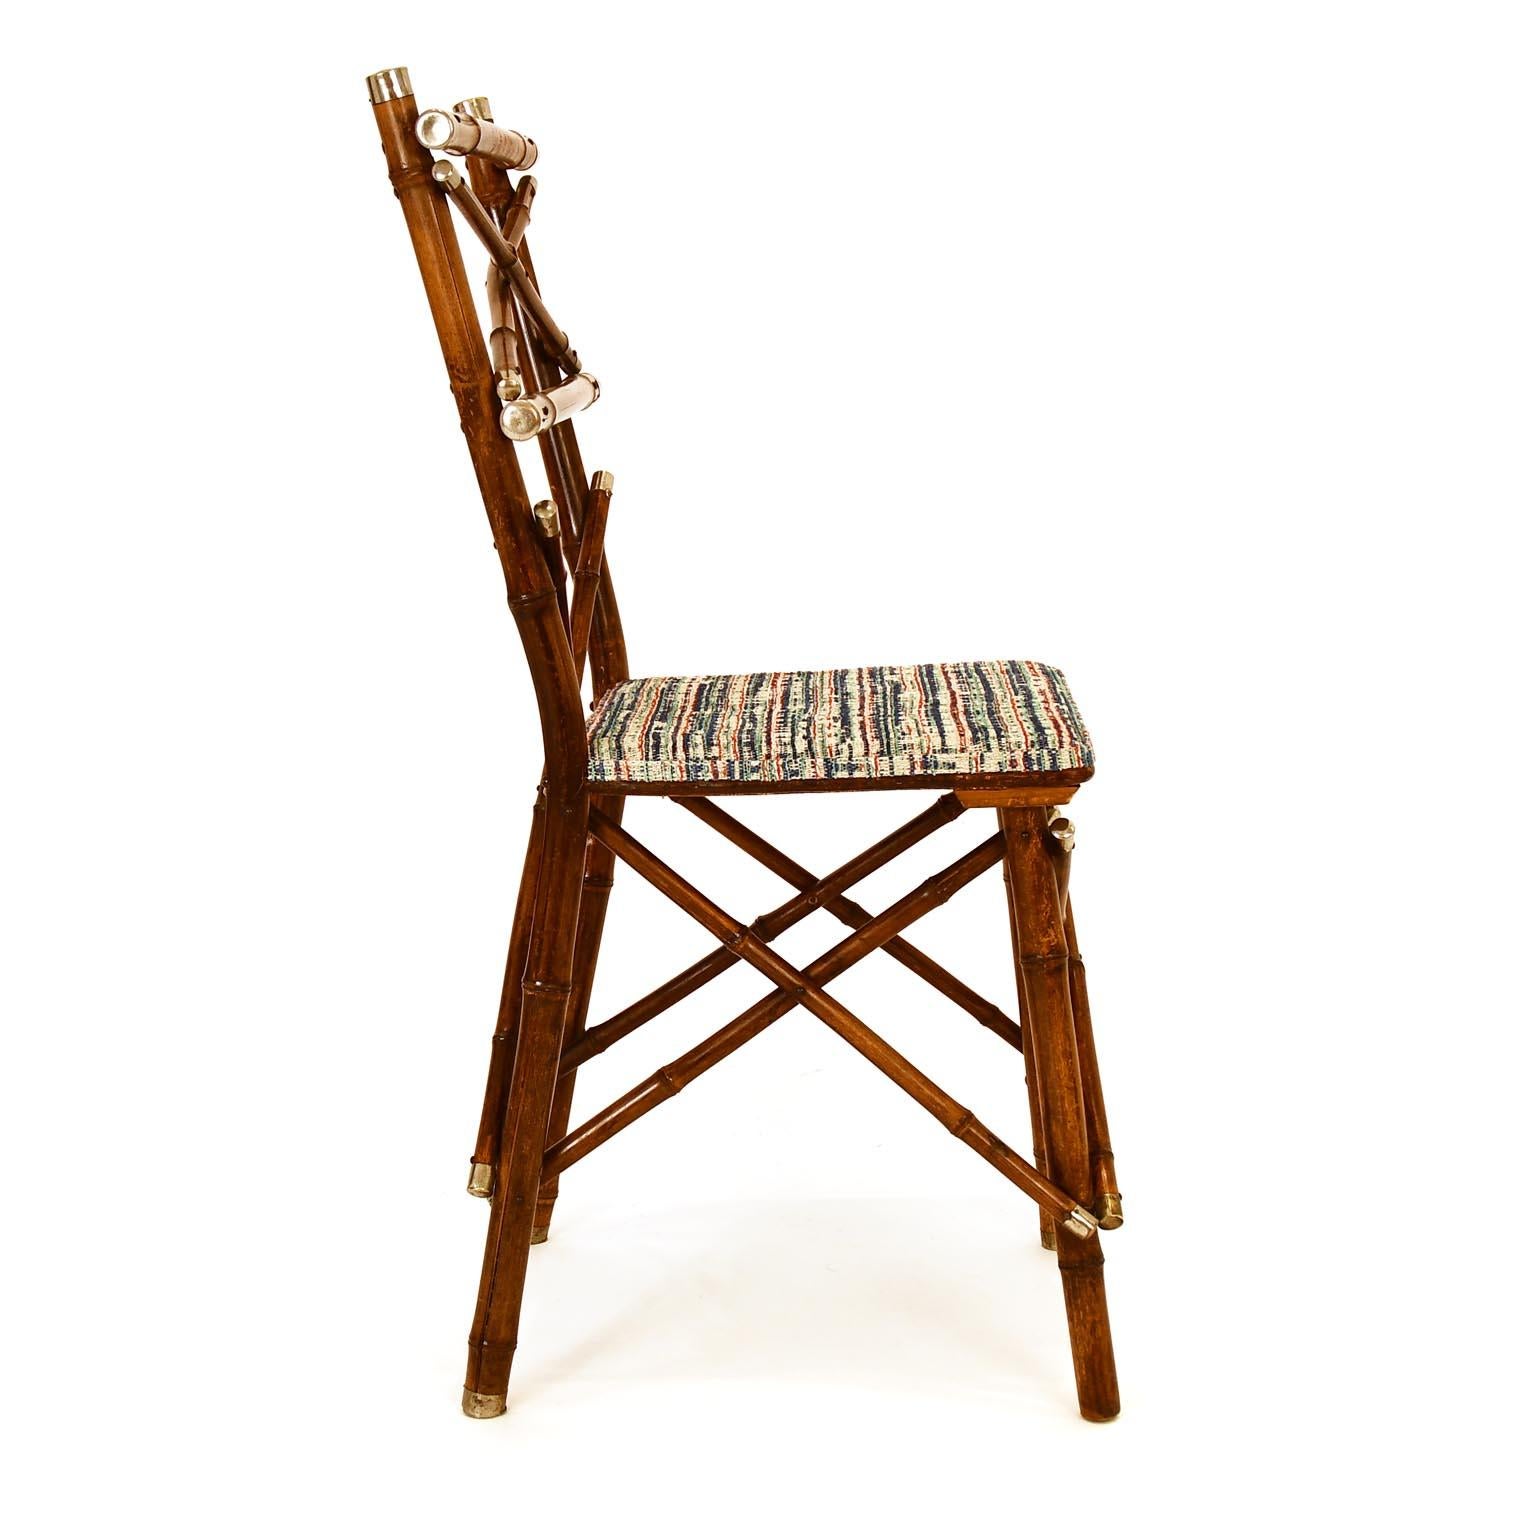 Fabric Decorative Early 20th Century Bamboo Chair, Upholstery, Austria, 1910s